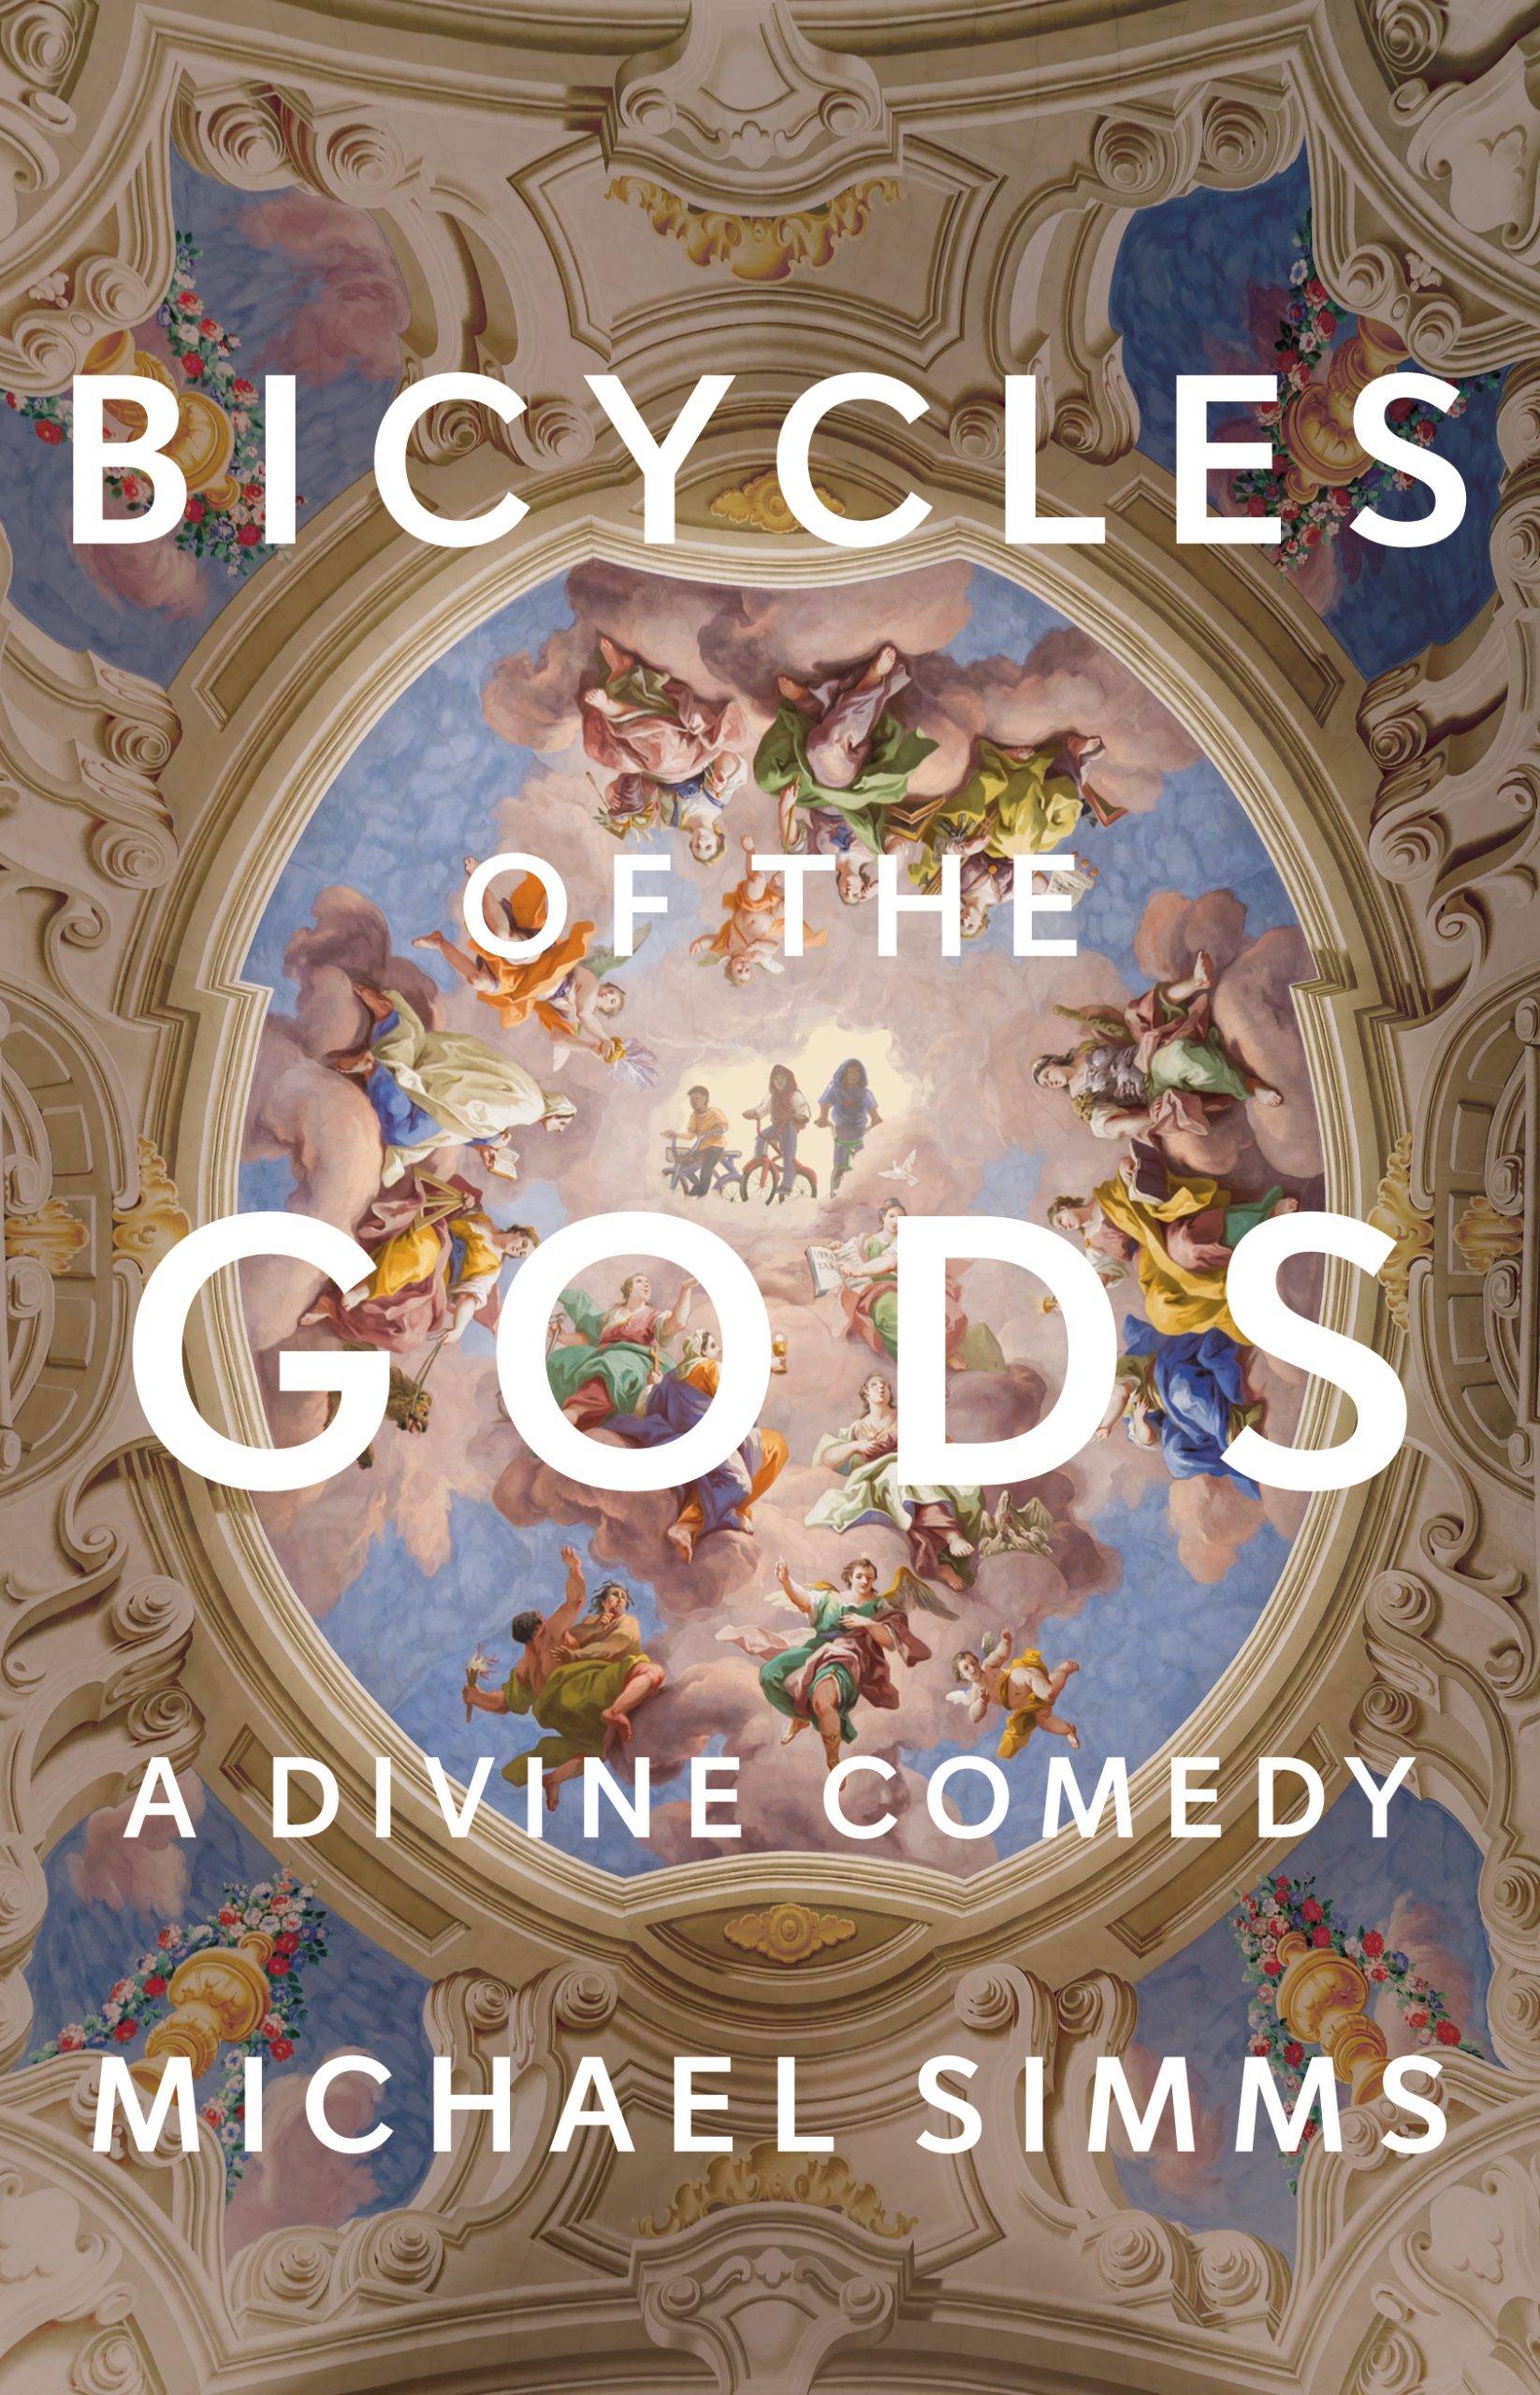 Bicycles of the Gods: A Divine Comedy by Michael Simms. An amazing frescoed ceiling shows three boys on bicycles surveying the world below.